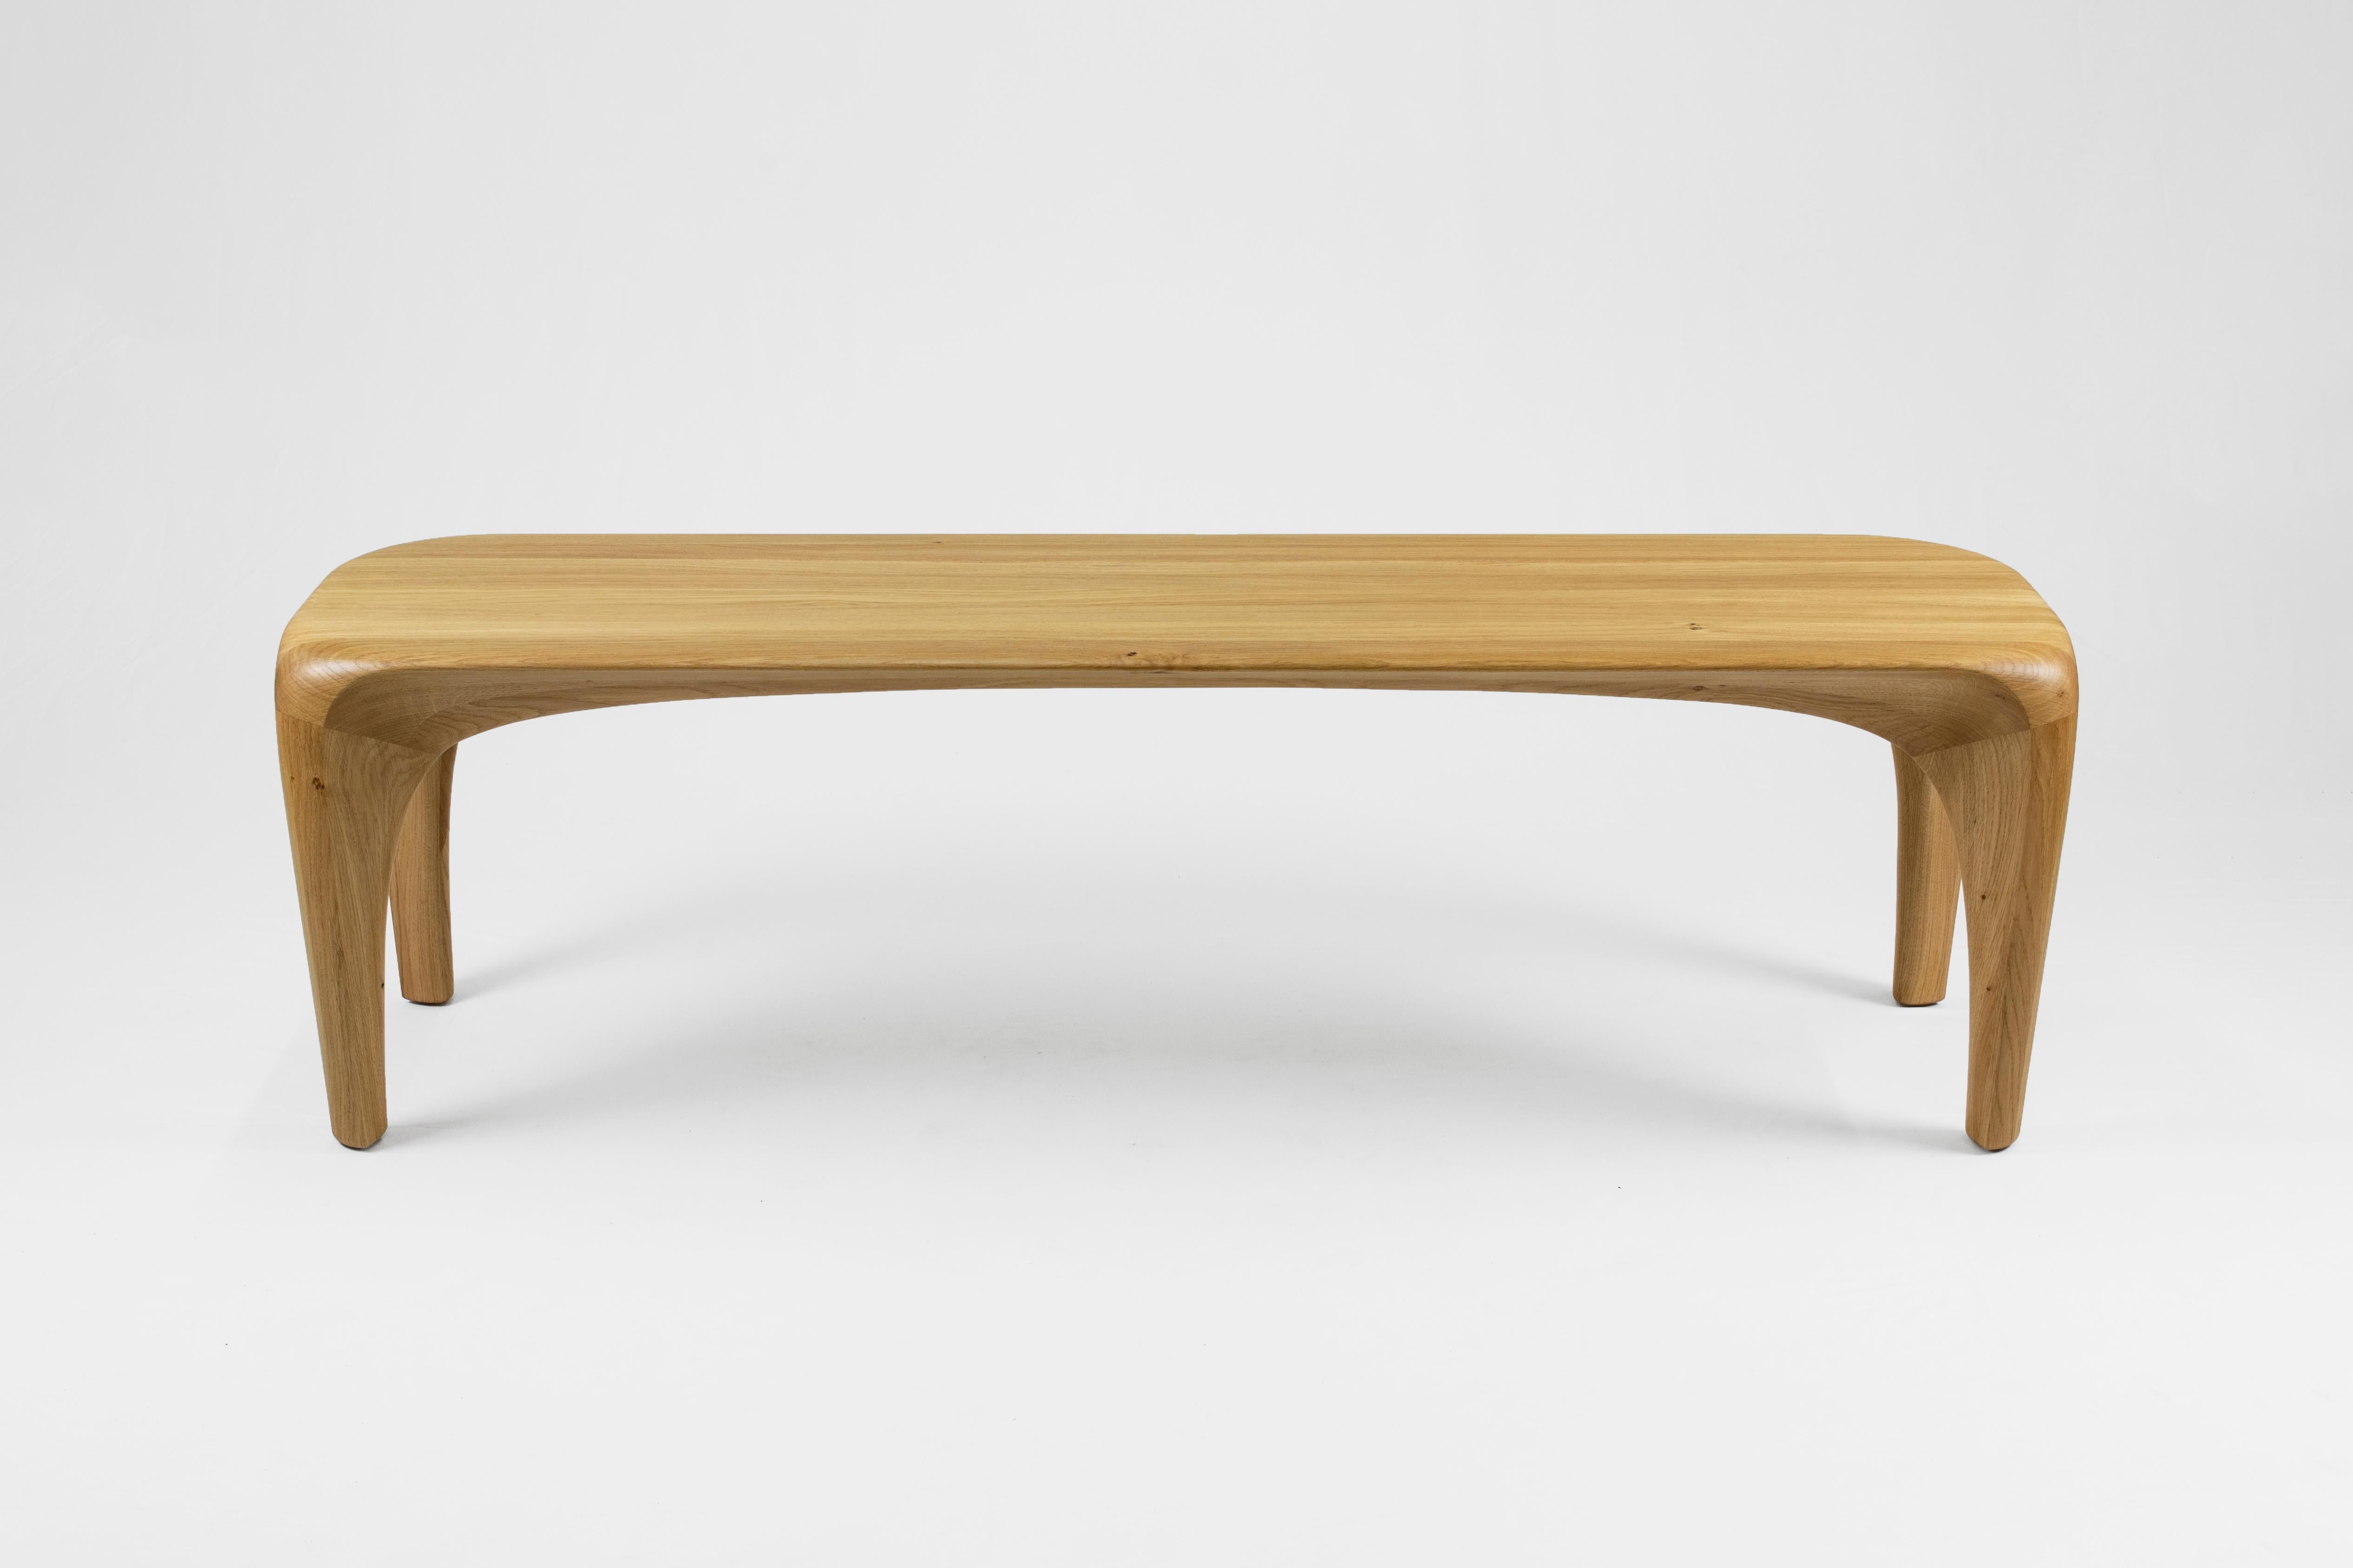 Oak bench spline by Maxime Goléo
Unique Piece
Dimensions: W 159 x D 38 x H 45 cm
Materials: French oak and natural oil

Each piece is unique, handmade, signed and dated.
Other dimensions and types of wood on request.

Designer, cabinetmaker